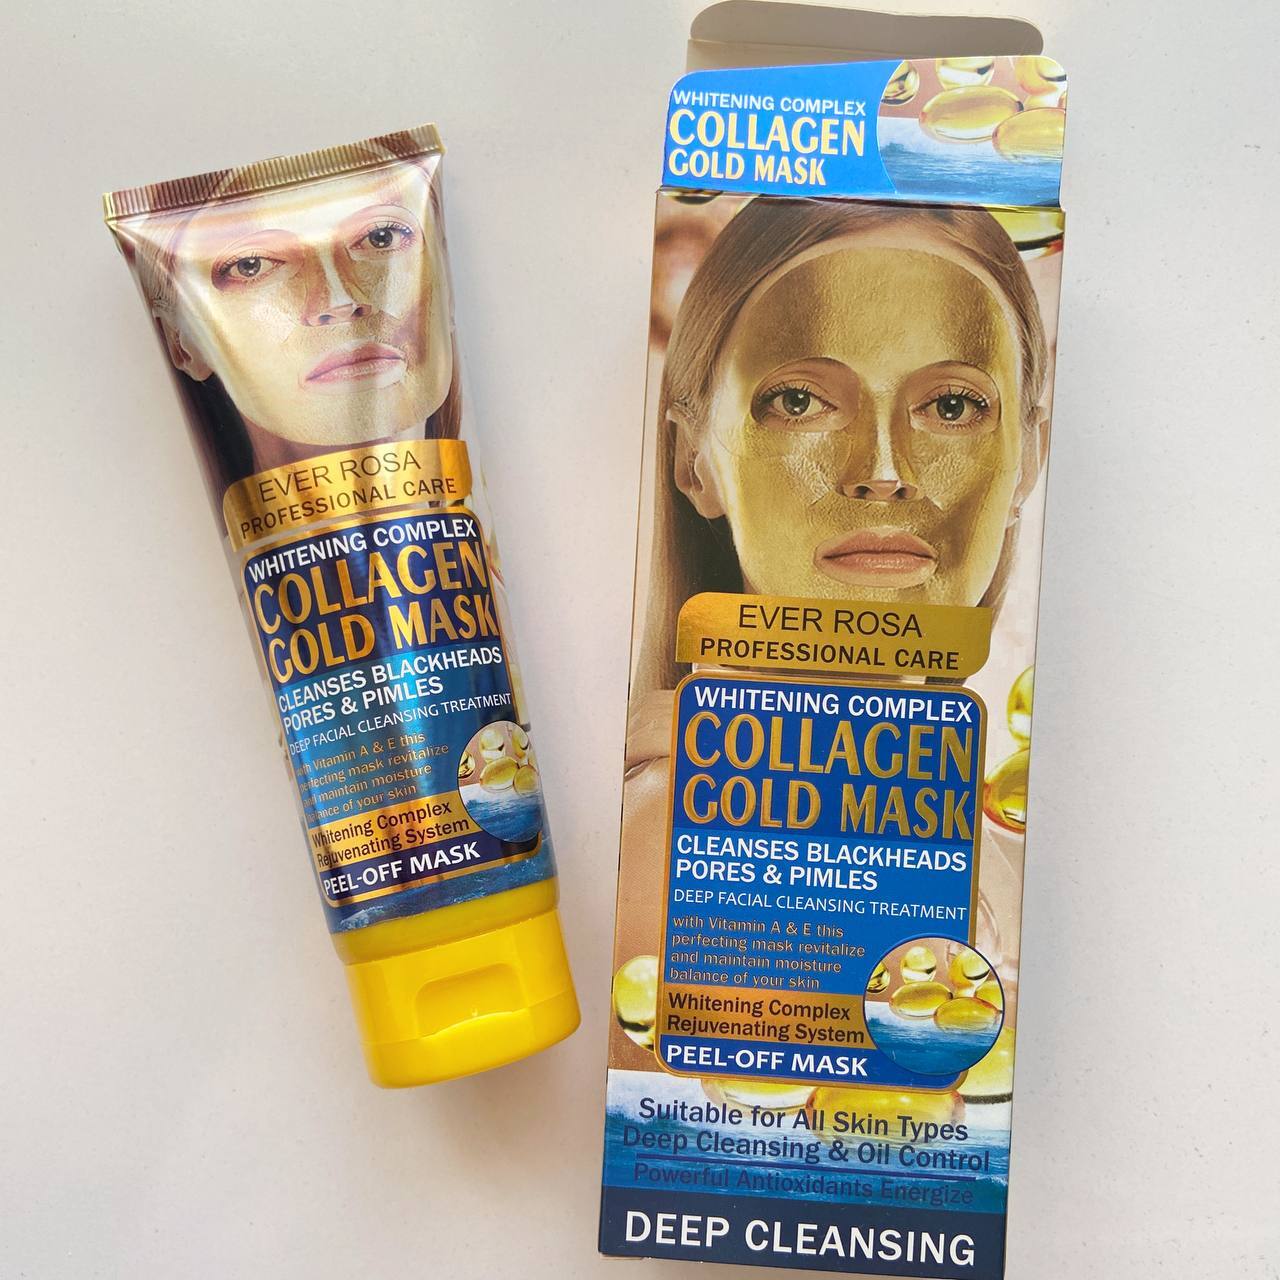 Ever Rosa Whitening Complex Collagen Gold Mask